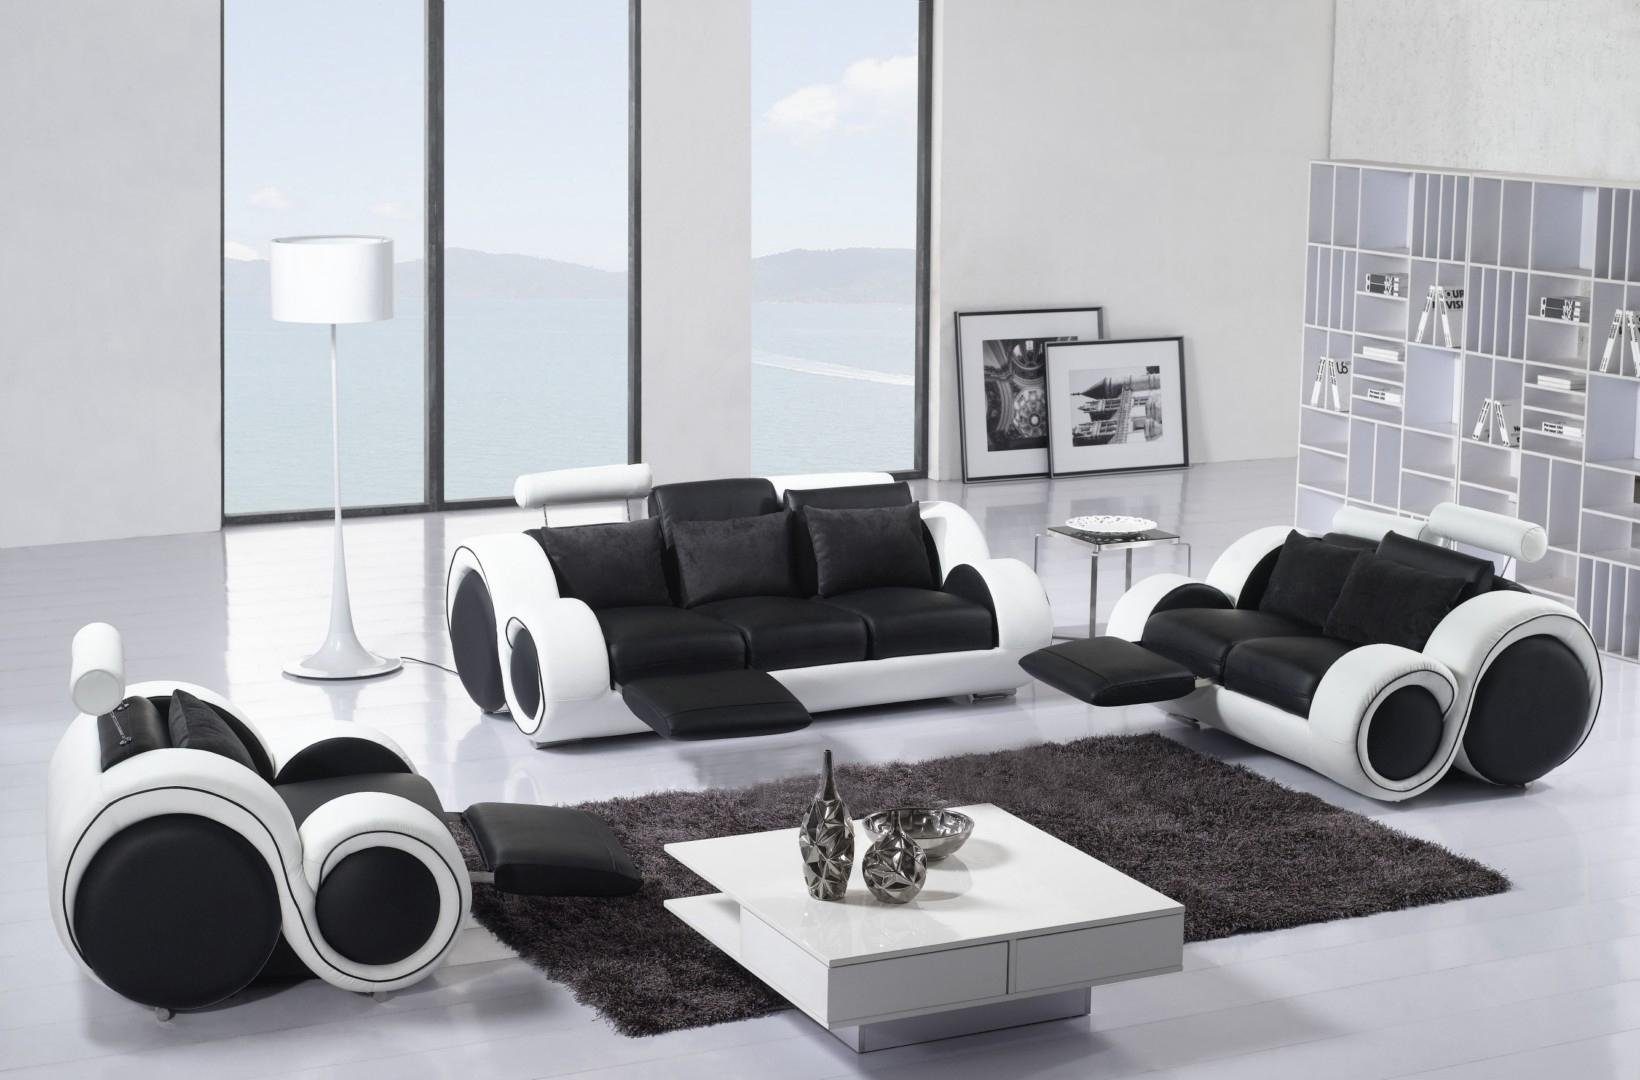 JVmoebel Sofa Moderne Sofagarnitur 3+2+1 Relax Funktion Sitzer Sofa Couch, Made in Europe | Alle Sofas